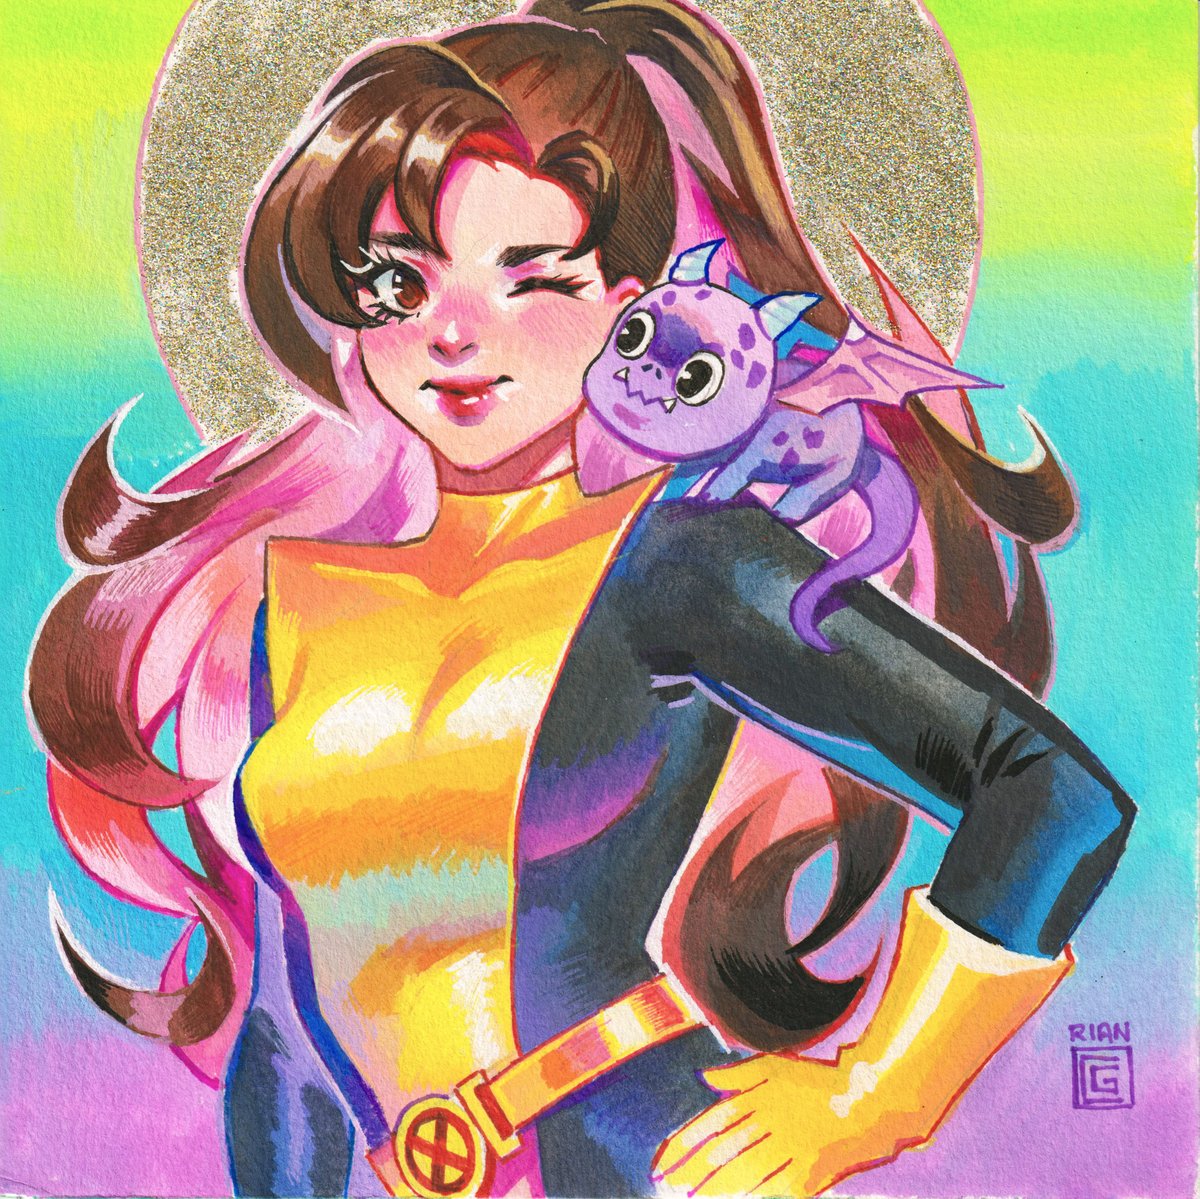 Kitty Pryde pre-con commission for @braveandboldart 😄💖Hope you guys like it! 😄💖 8' x 8' inches Gouache and watercolor Painting timelapse will be available at my Patre*n soon #ジャパコミ